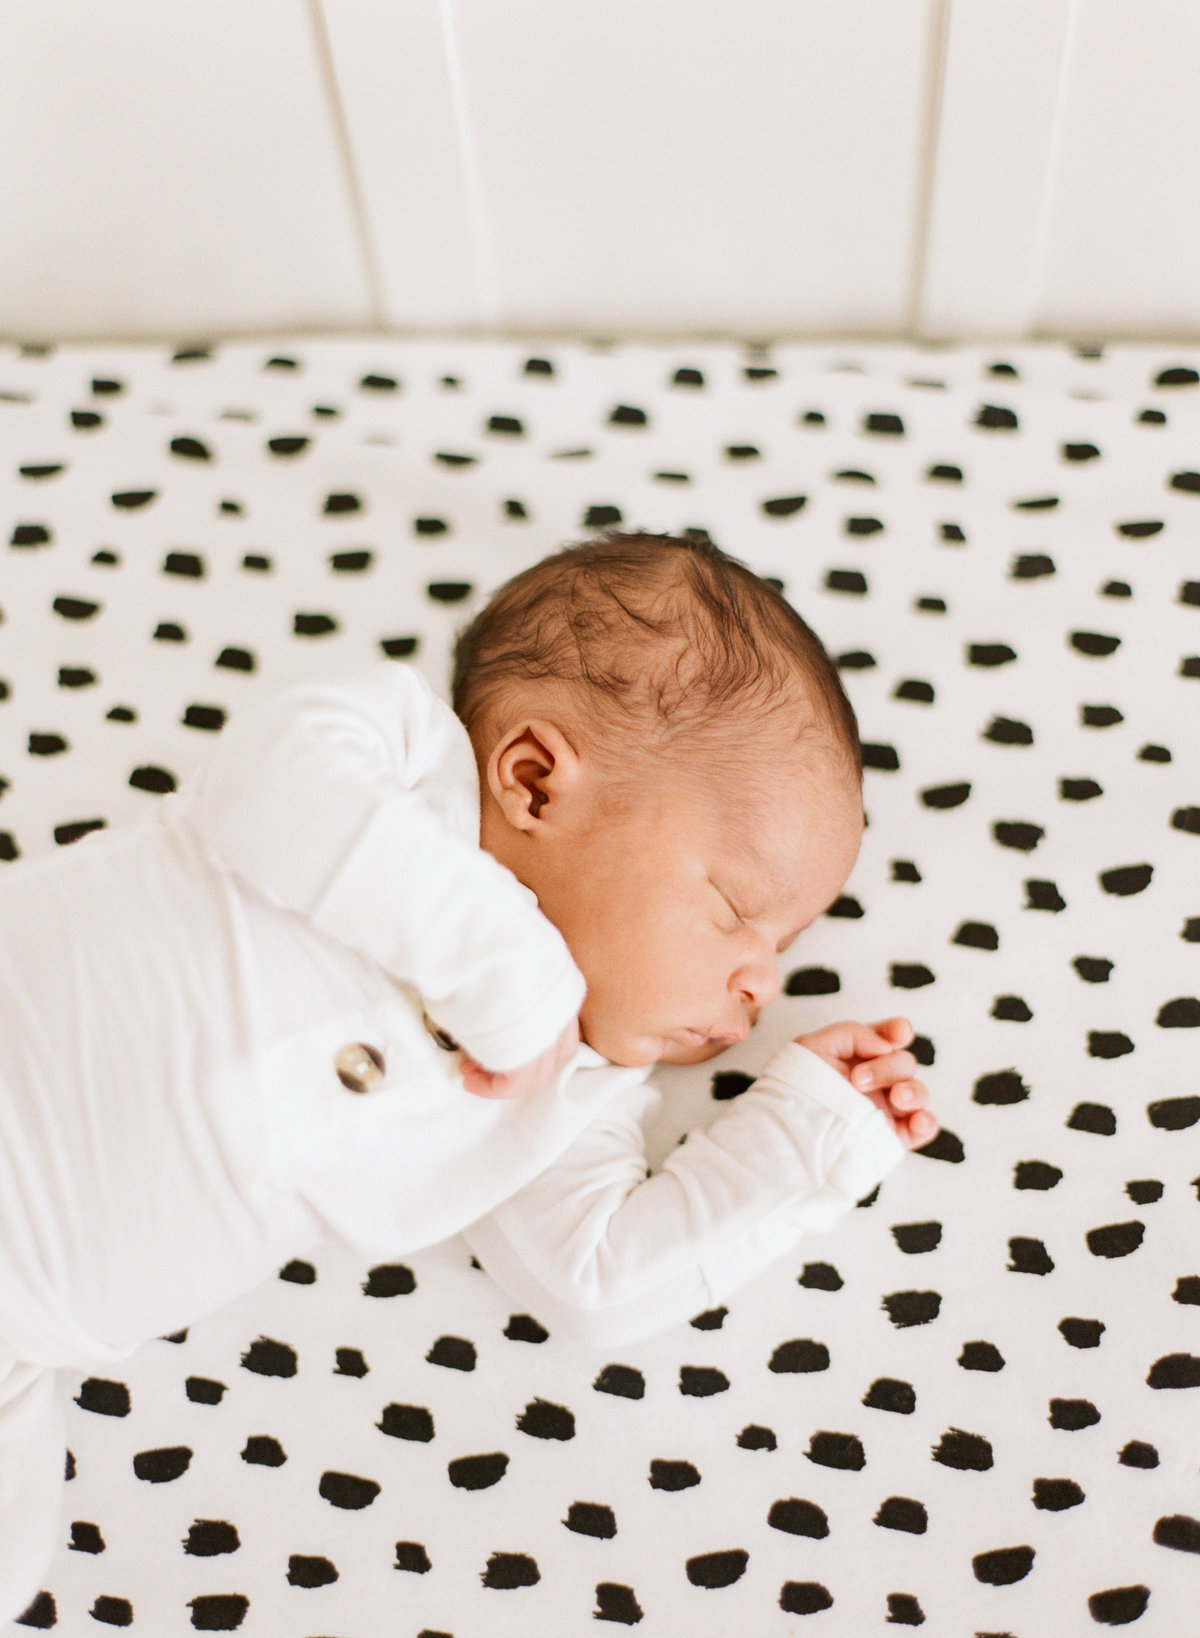 Baby sleeps on polkadot crib sheet in newborn session in Wake Forest NC. Photographed by Raleigh Newborn Photographer A.J. Dunlap Photography.